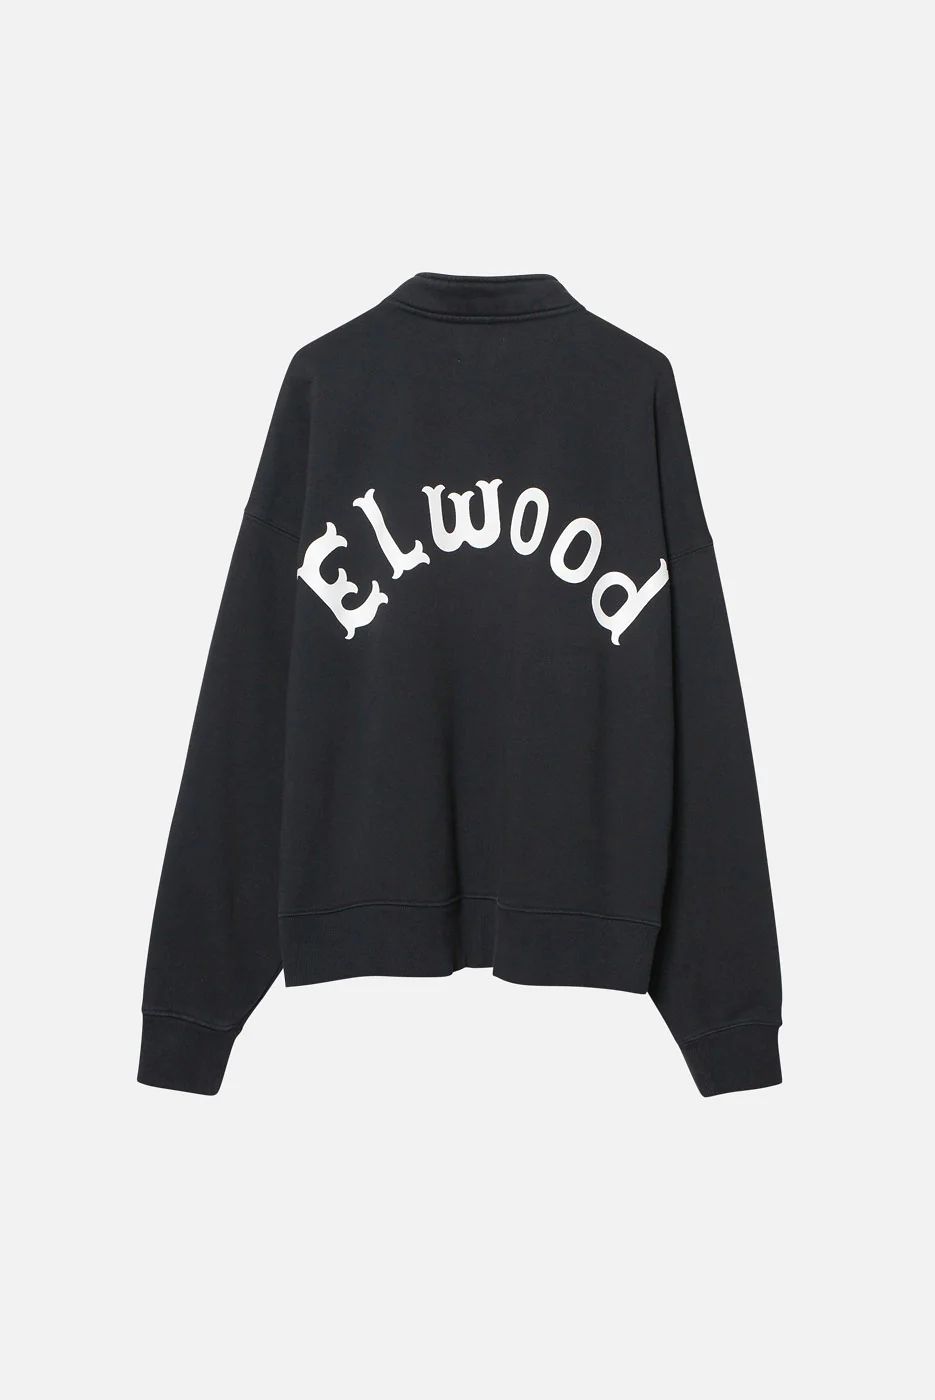 1/4 ZIP PULLOVER | Elwood Clothing